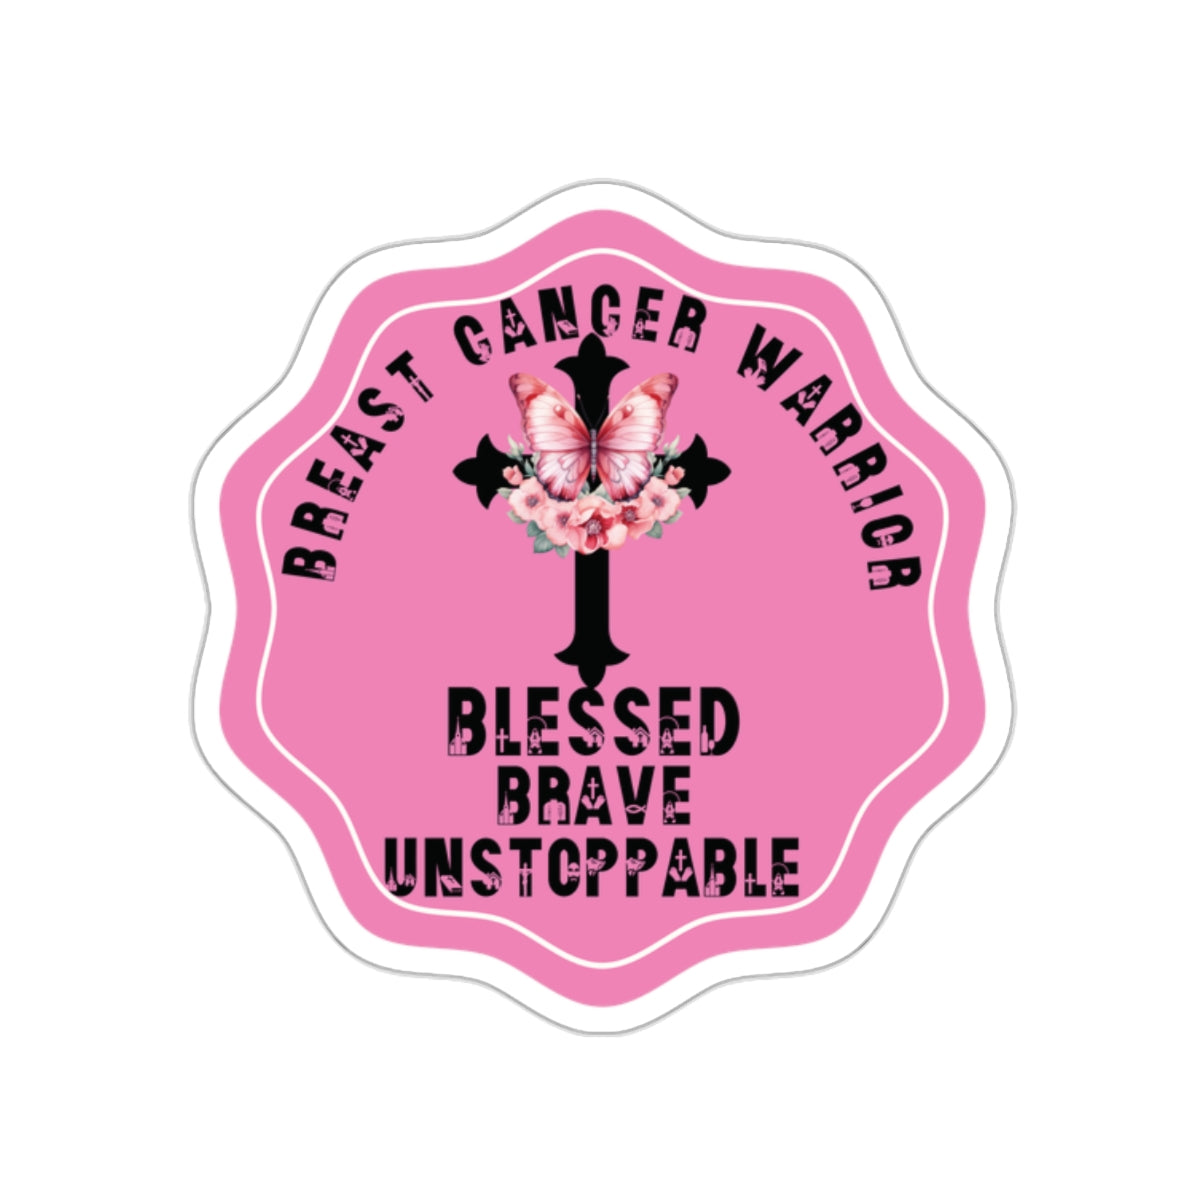 Blessed Breast Cancer Warrior Motivational Quote Kiss-Cut Stickers-Paper products-2" × 2"-White-mysticalcherry